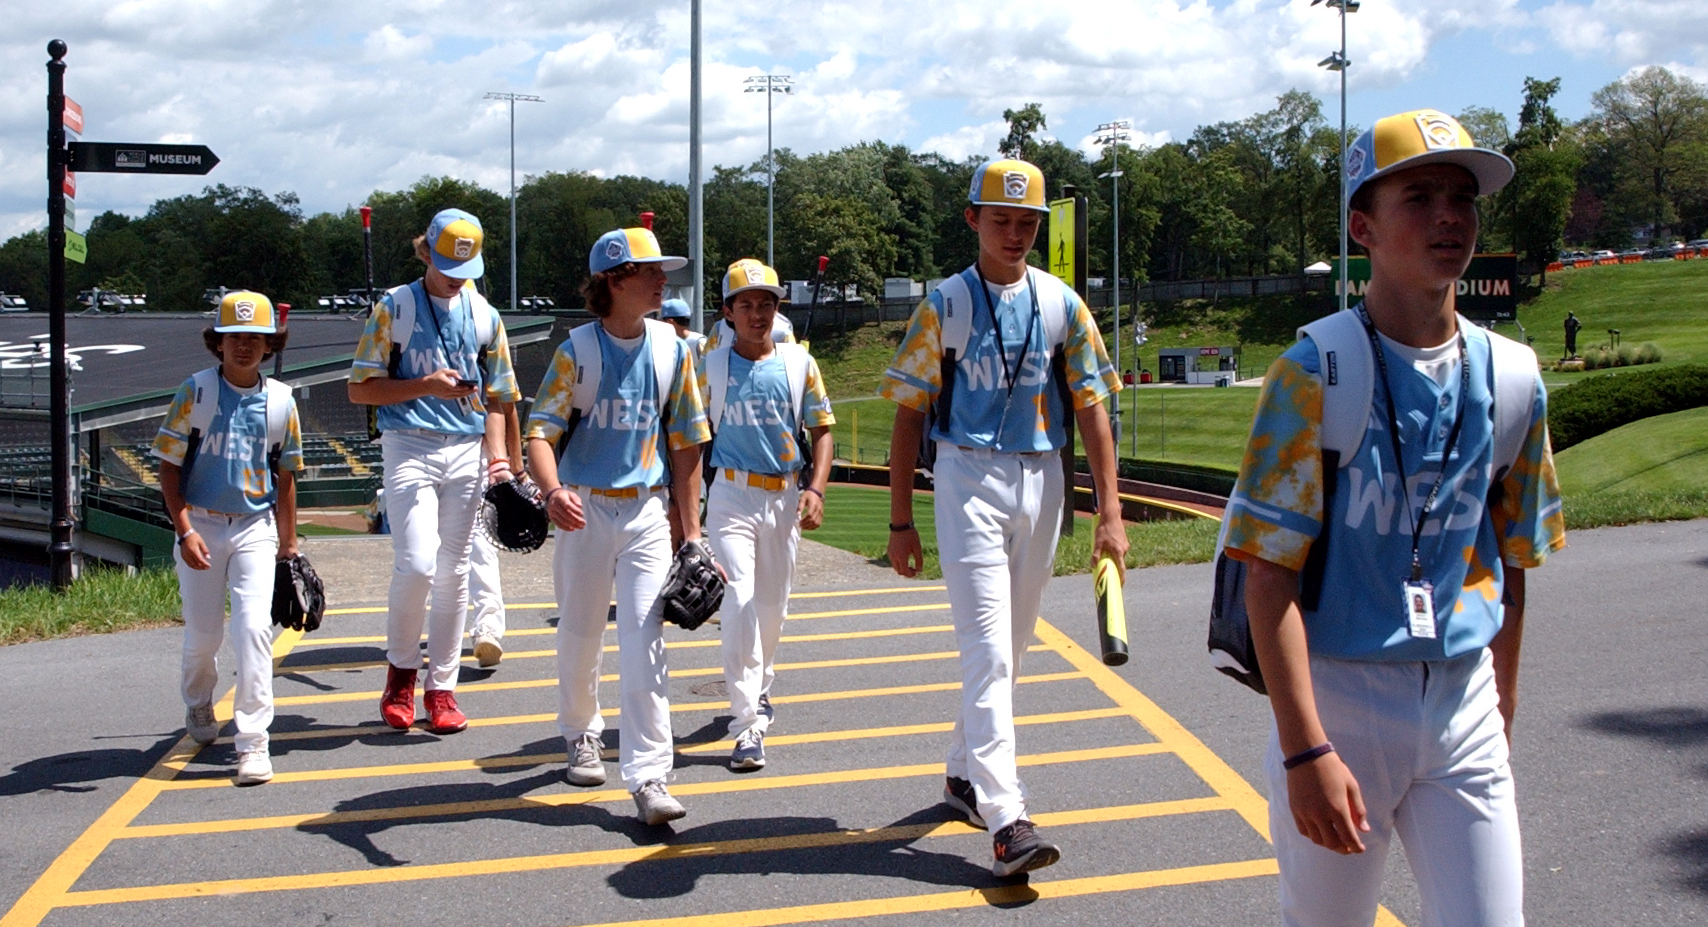 Media Little League World Series run: What you need to know - CBS